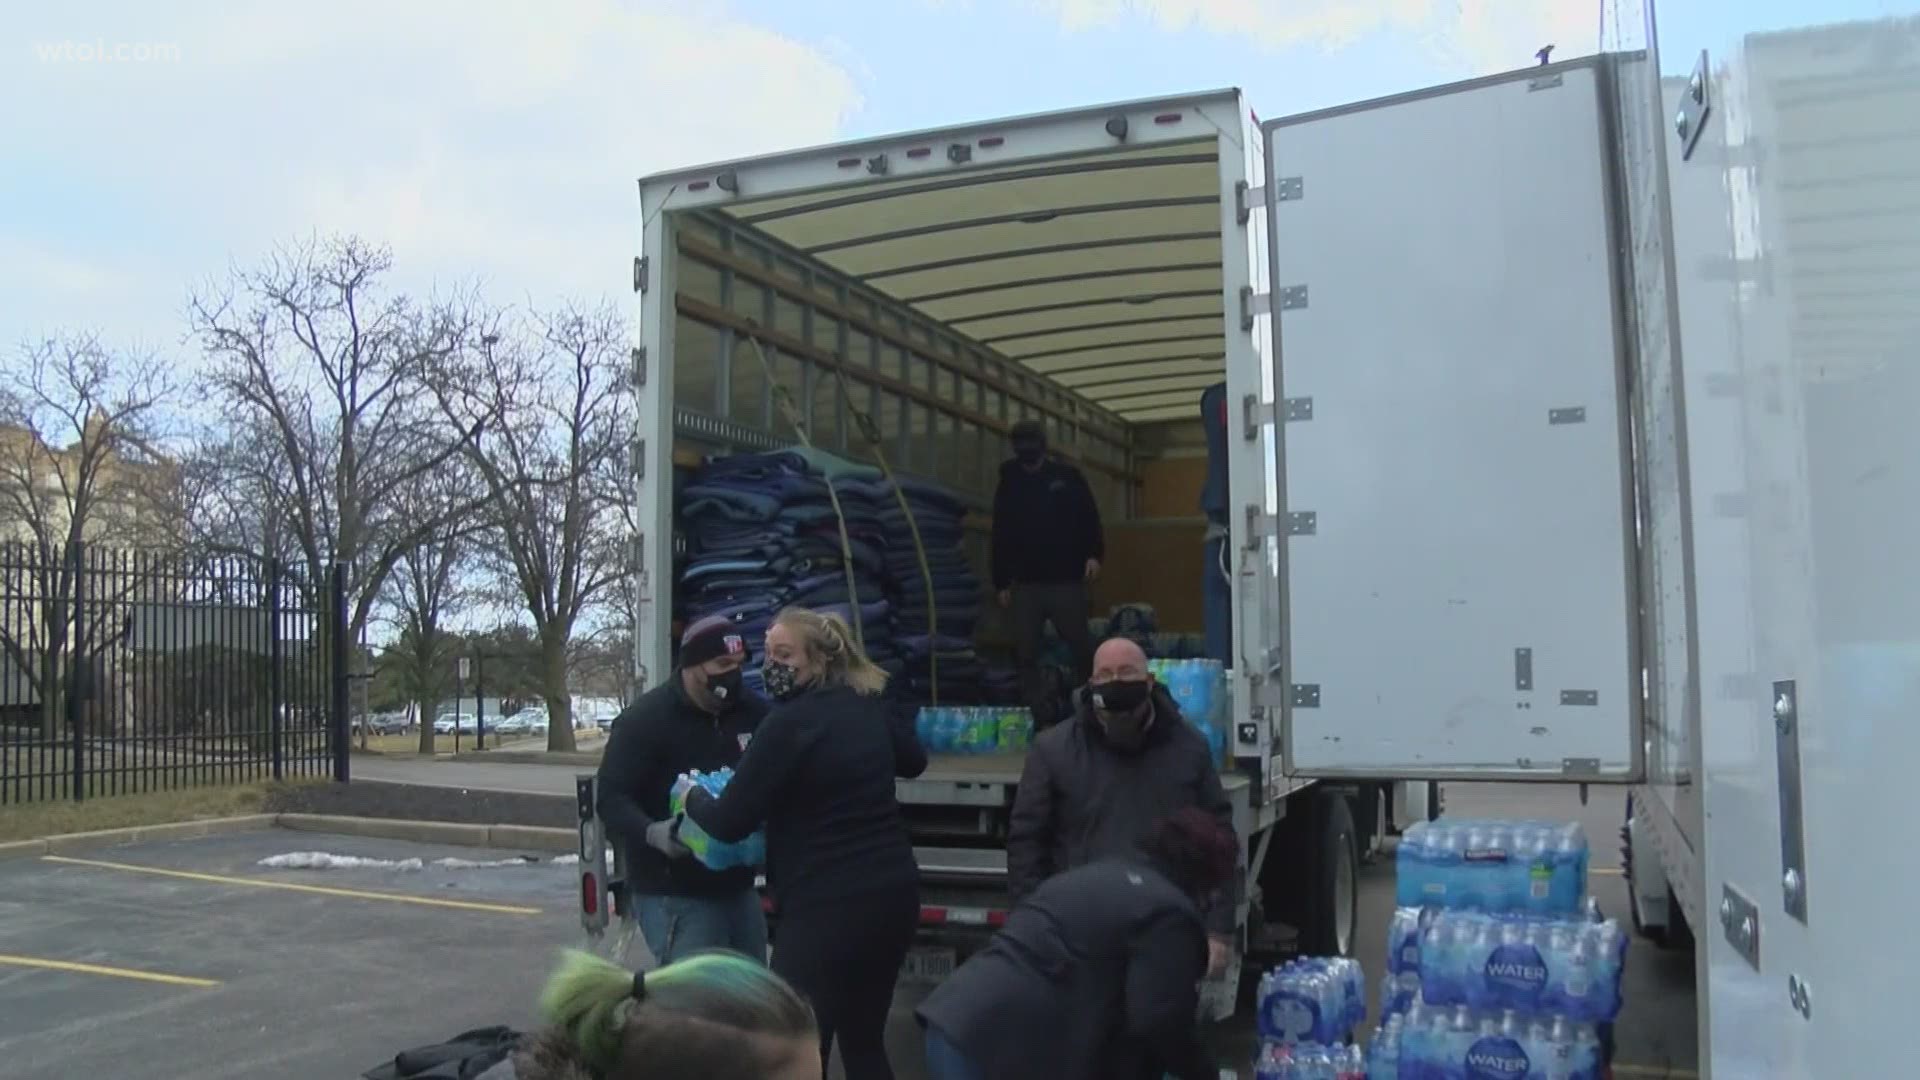 Thanks to an outpouring of generous donations, some local nonprofits were also able to receive much needed necessities while still Sending Hope to Texas.